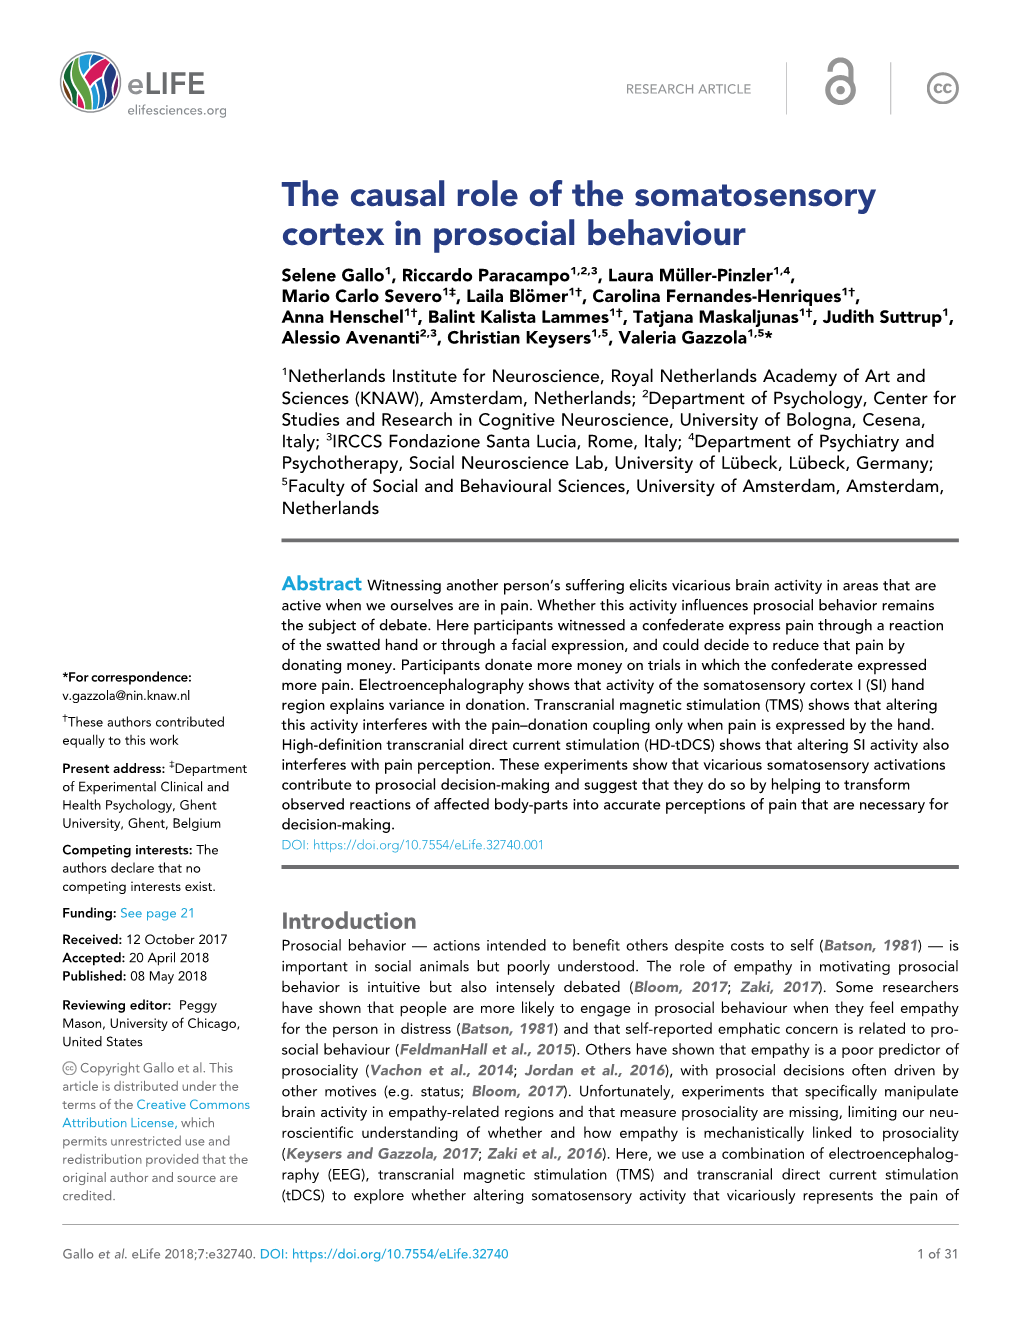 The Causal Role of the Somatosensory Cortex in Prosocial Behaviour